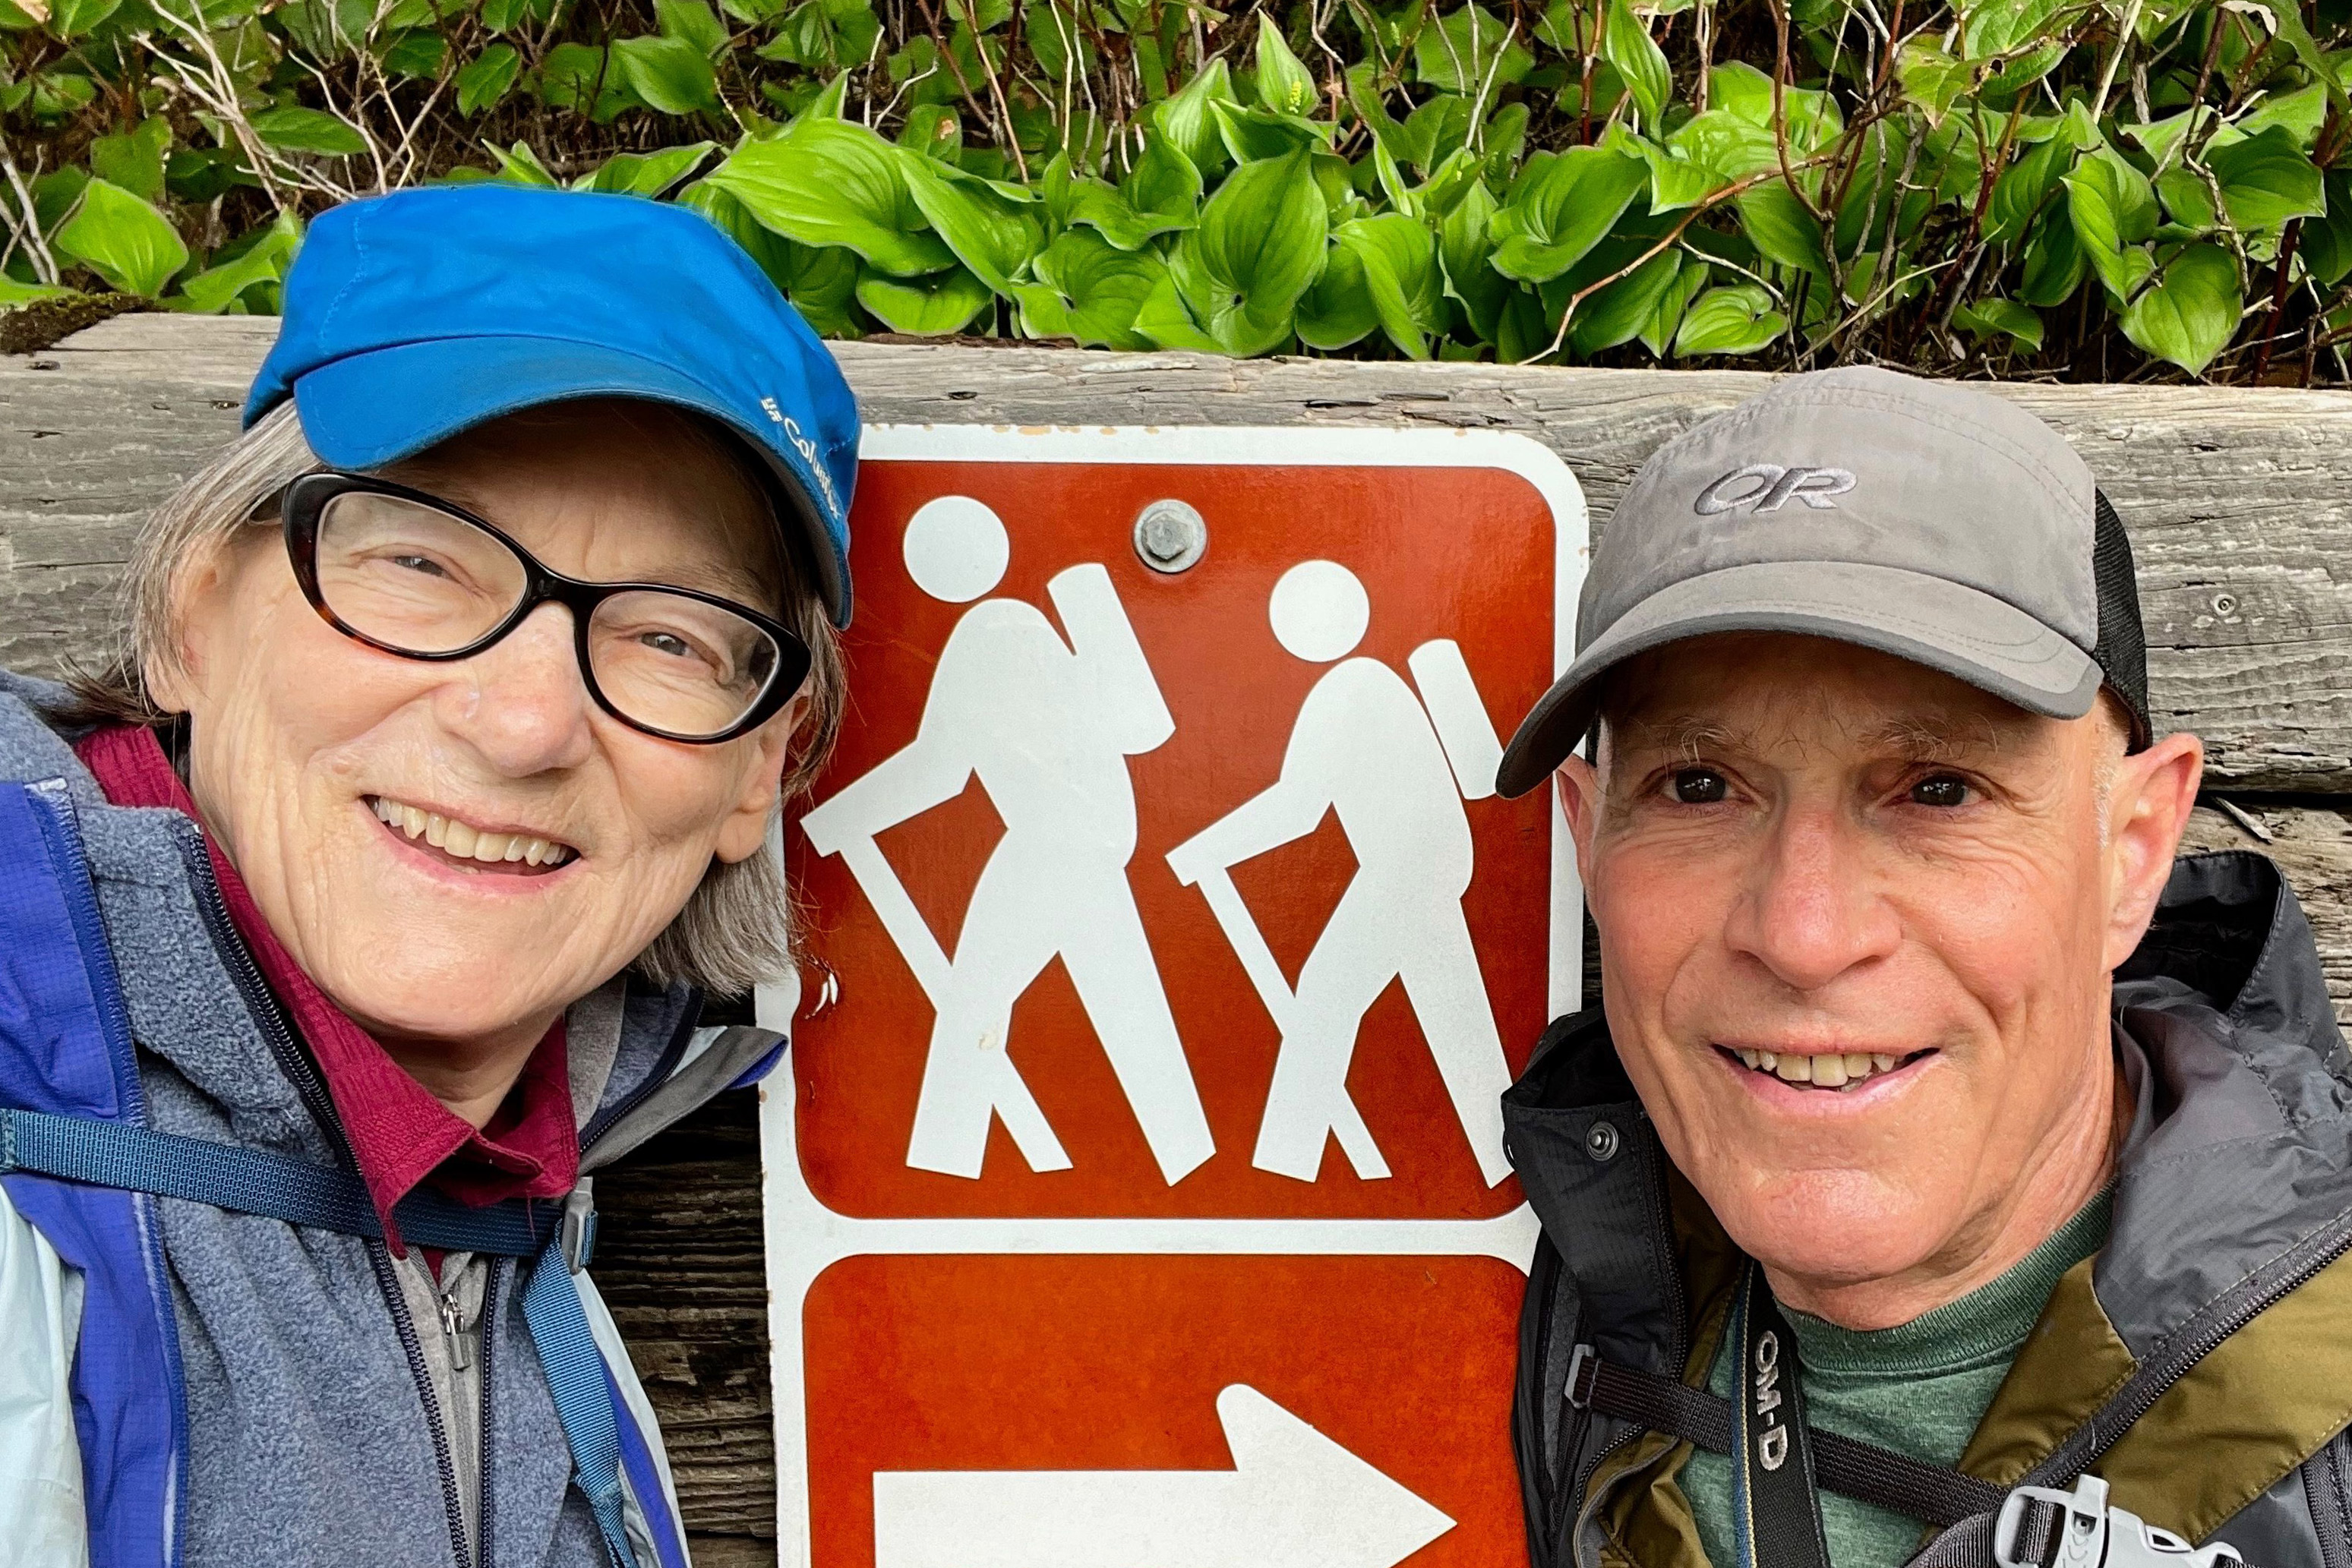 A photo of a couple posing for a selfie while outdoors in front of a hiking trail sign.